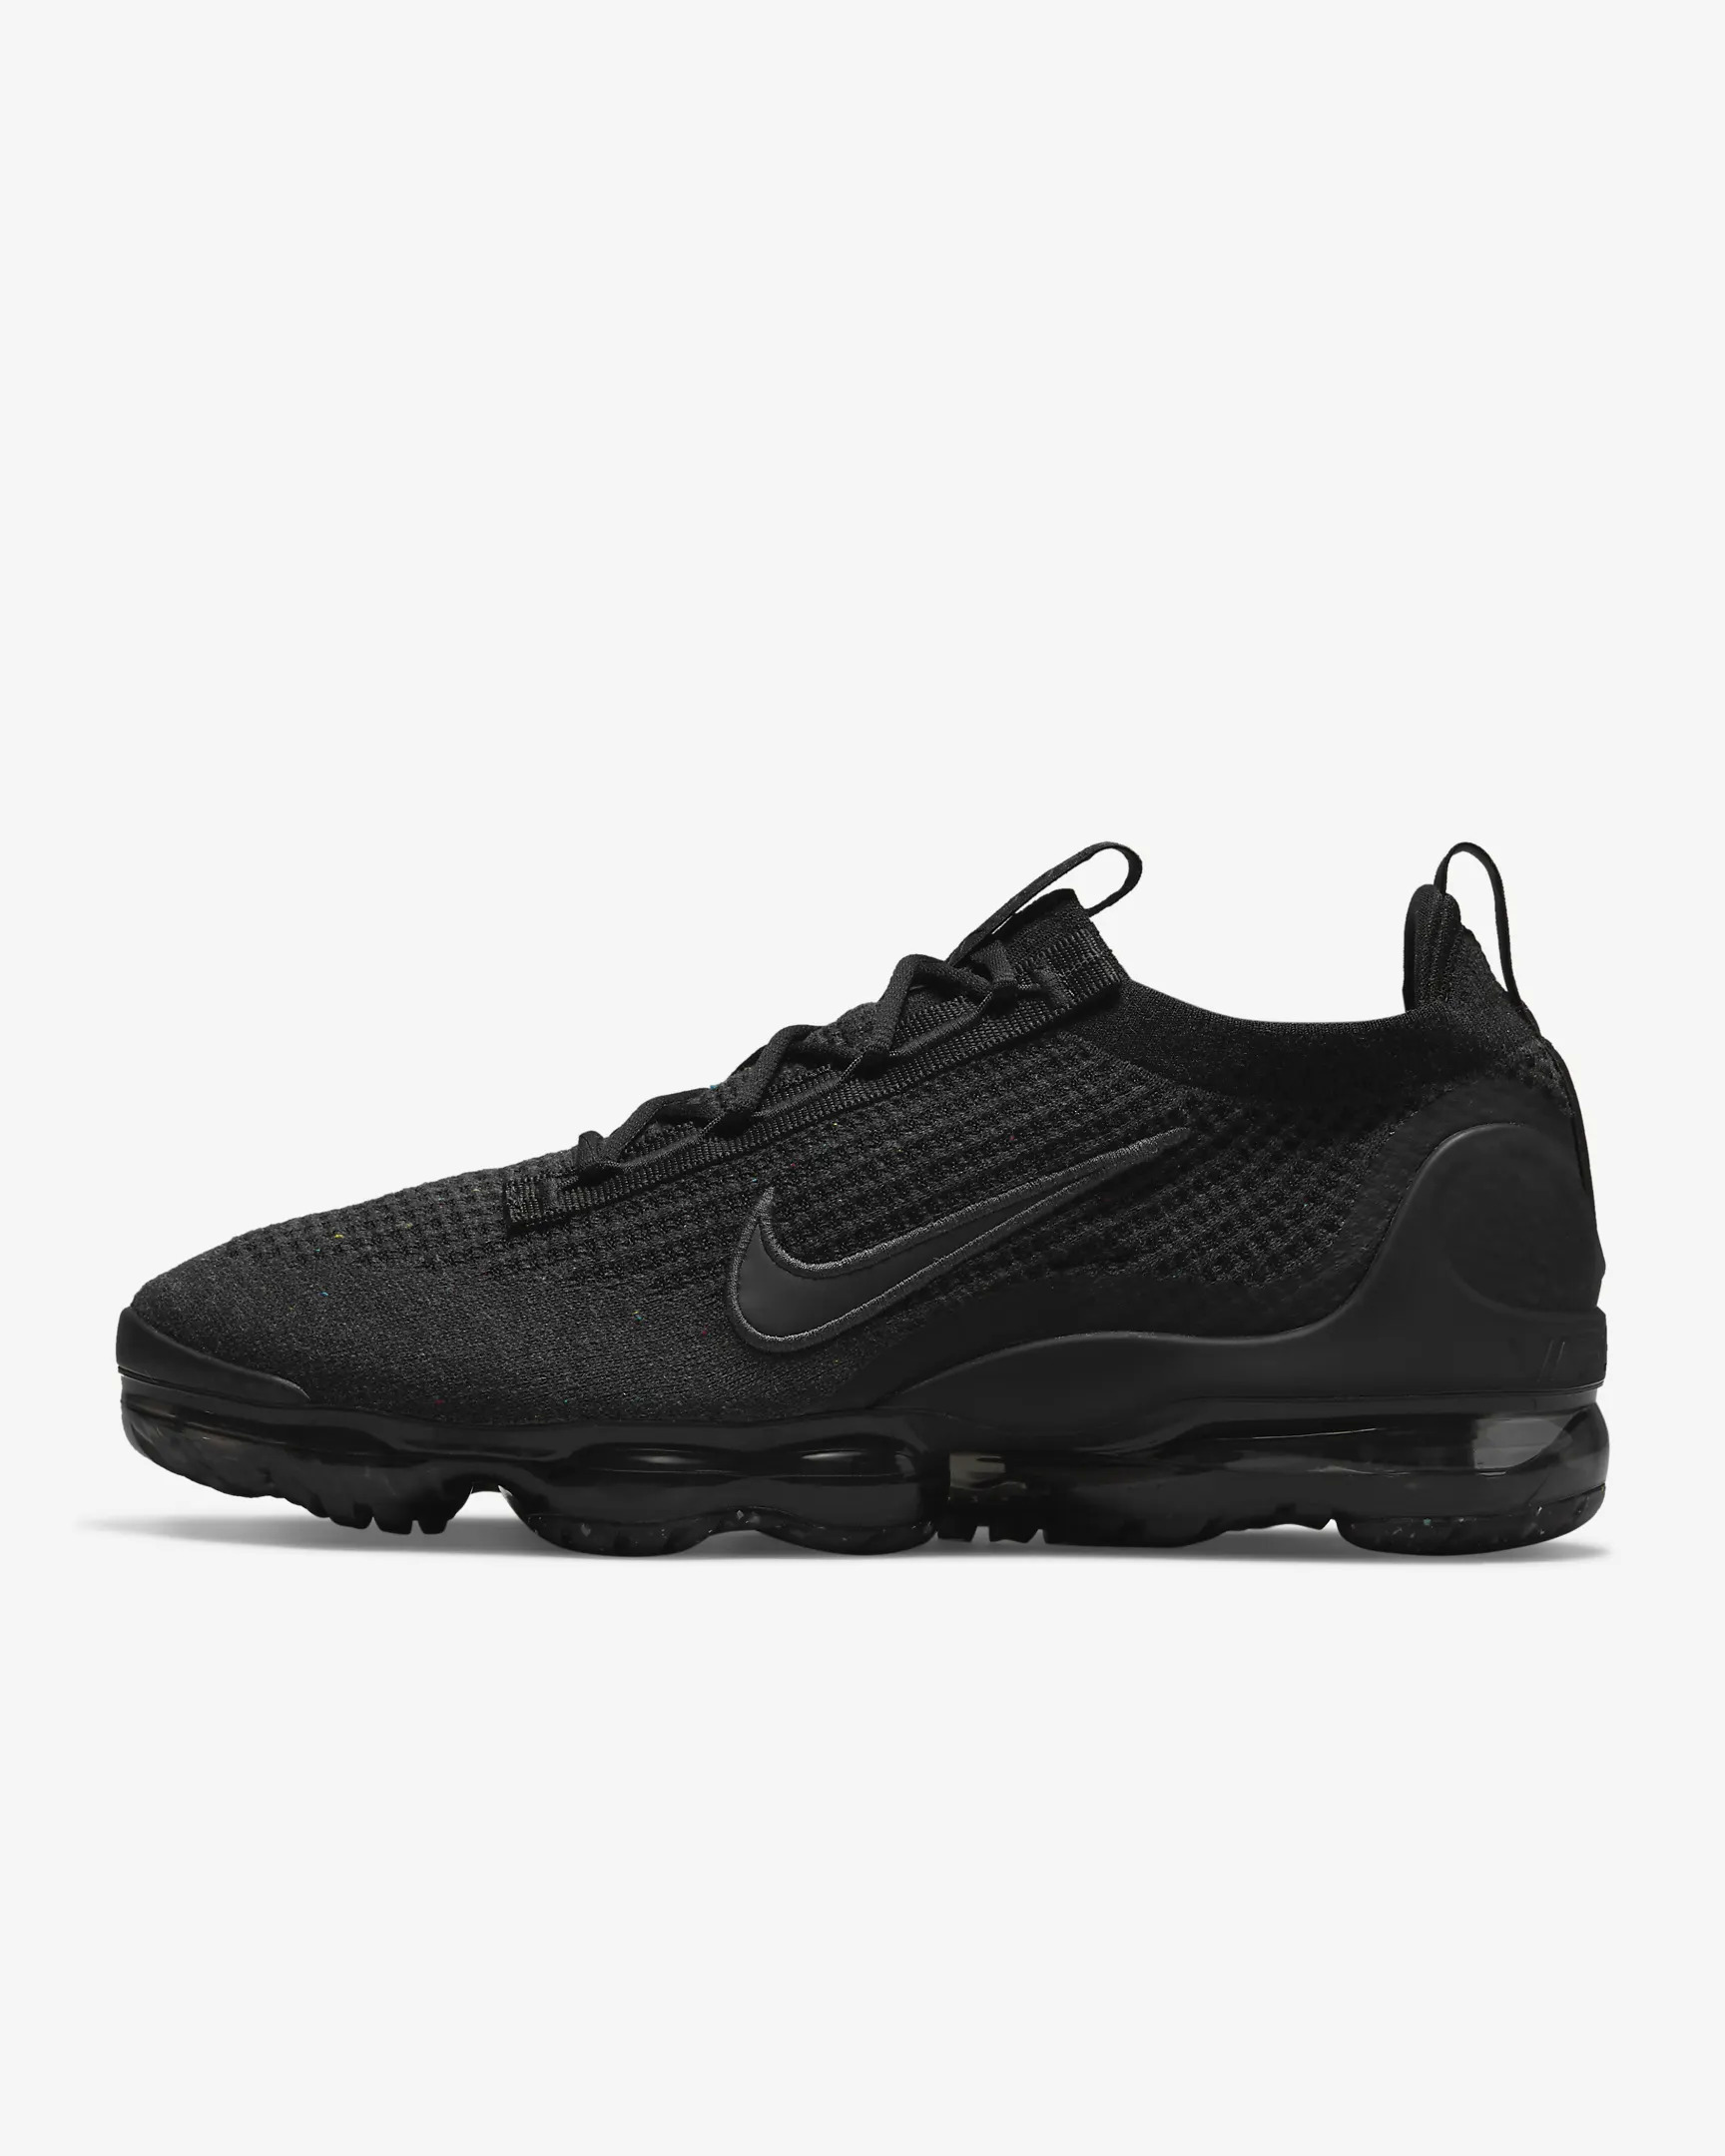 Nike Air VaporMax 2021 Flyknit Shoe (Black) $149.99 + Free Shipping with FLX Rewards